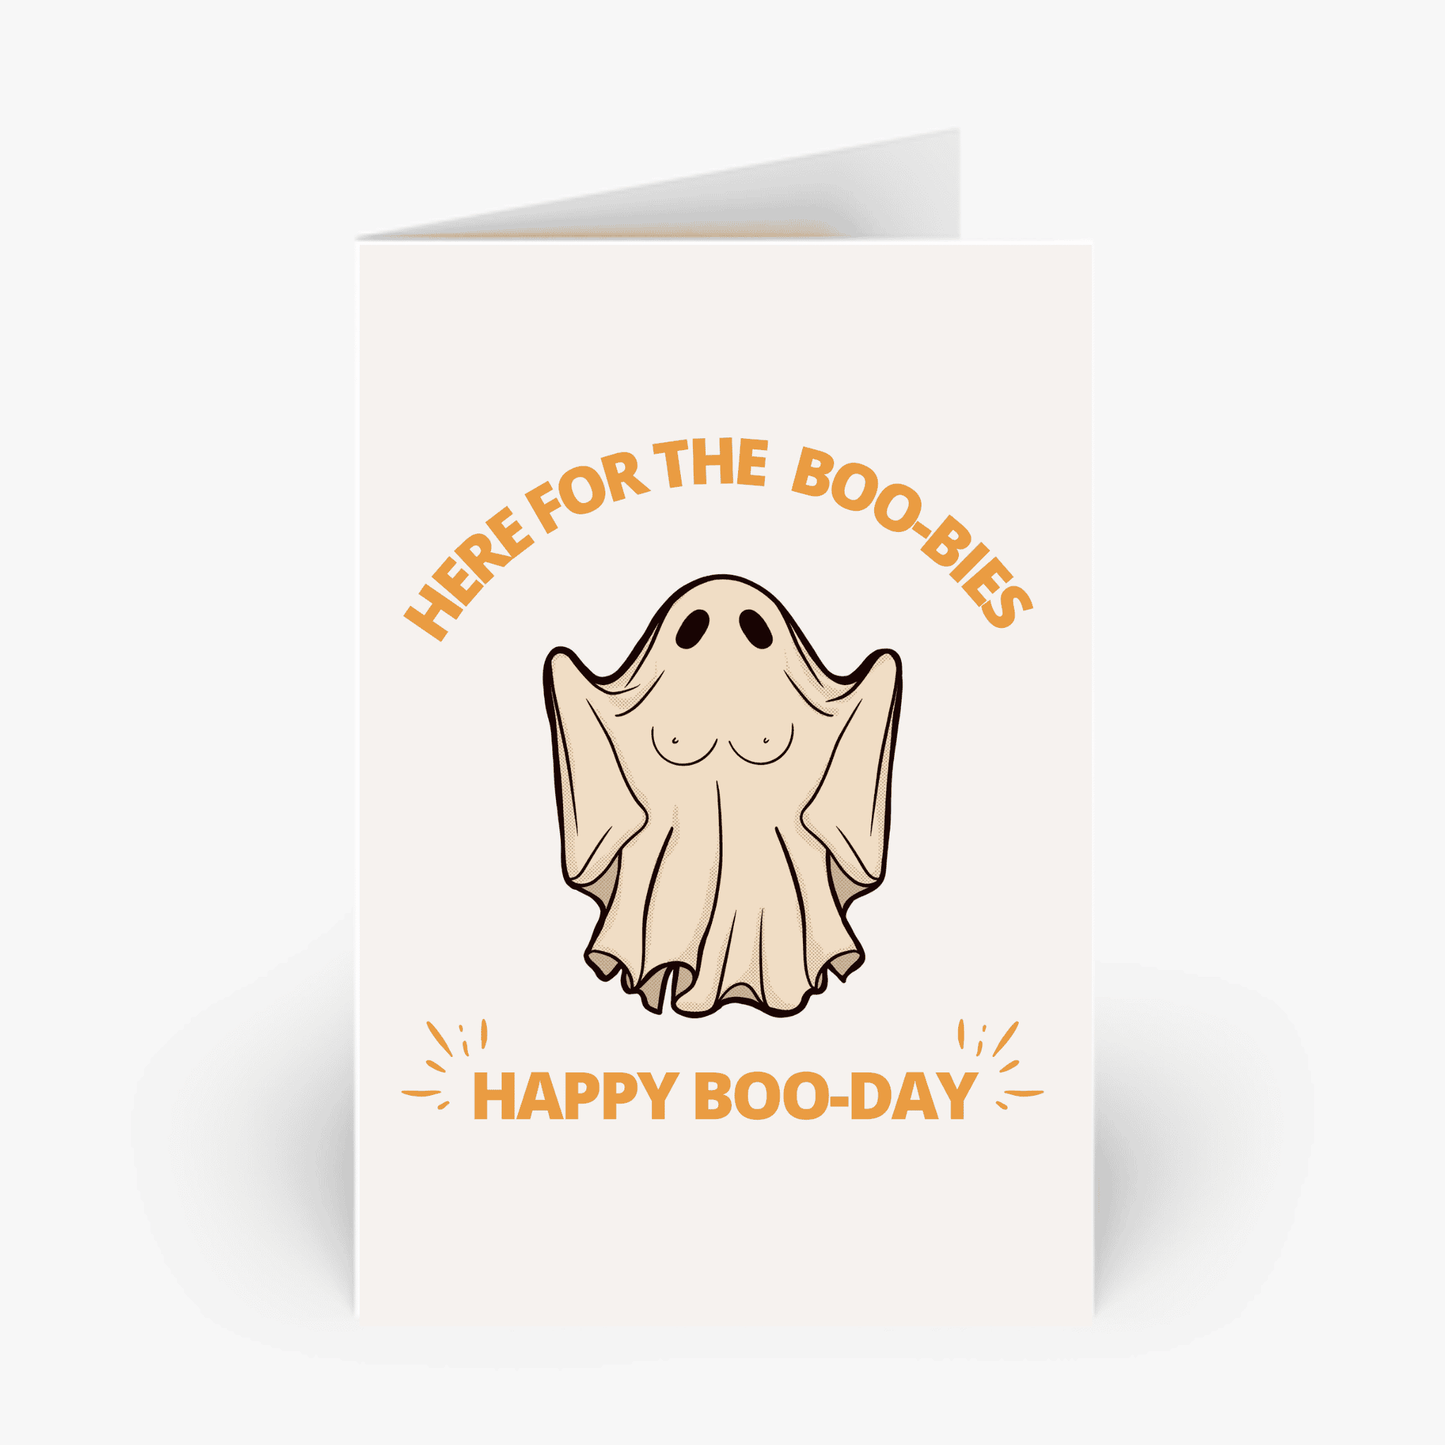 I Body Love Gift Card Here For The Boo-bies Halloween Card